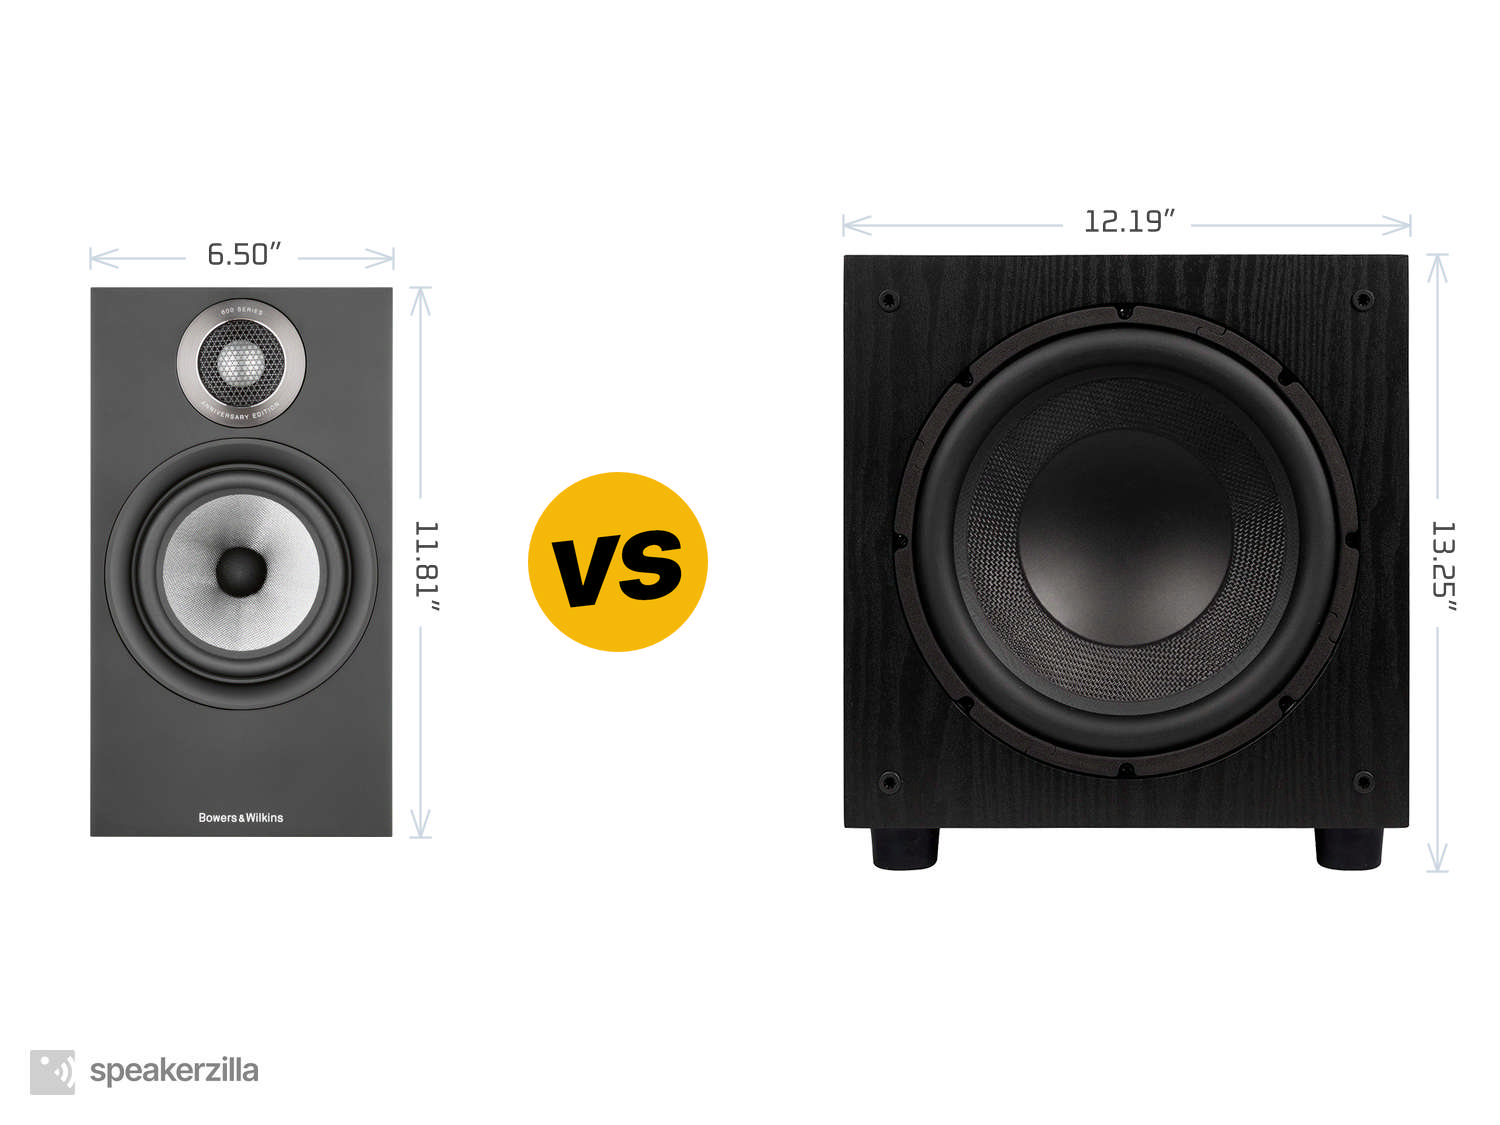 Bowers & Wilkins 607 S2 Anniversary Edition Speakers vs. Elac SUB1010 120W 10” Powered Subwoofer